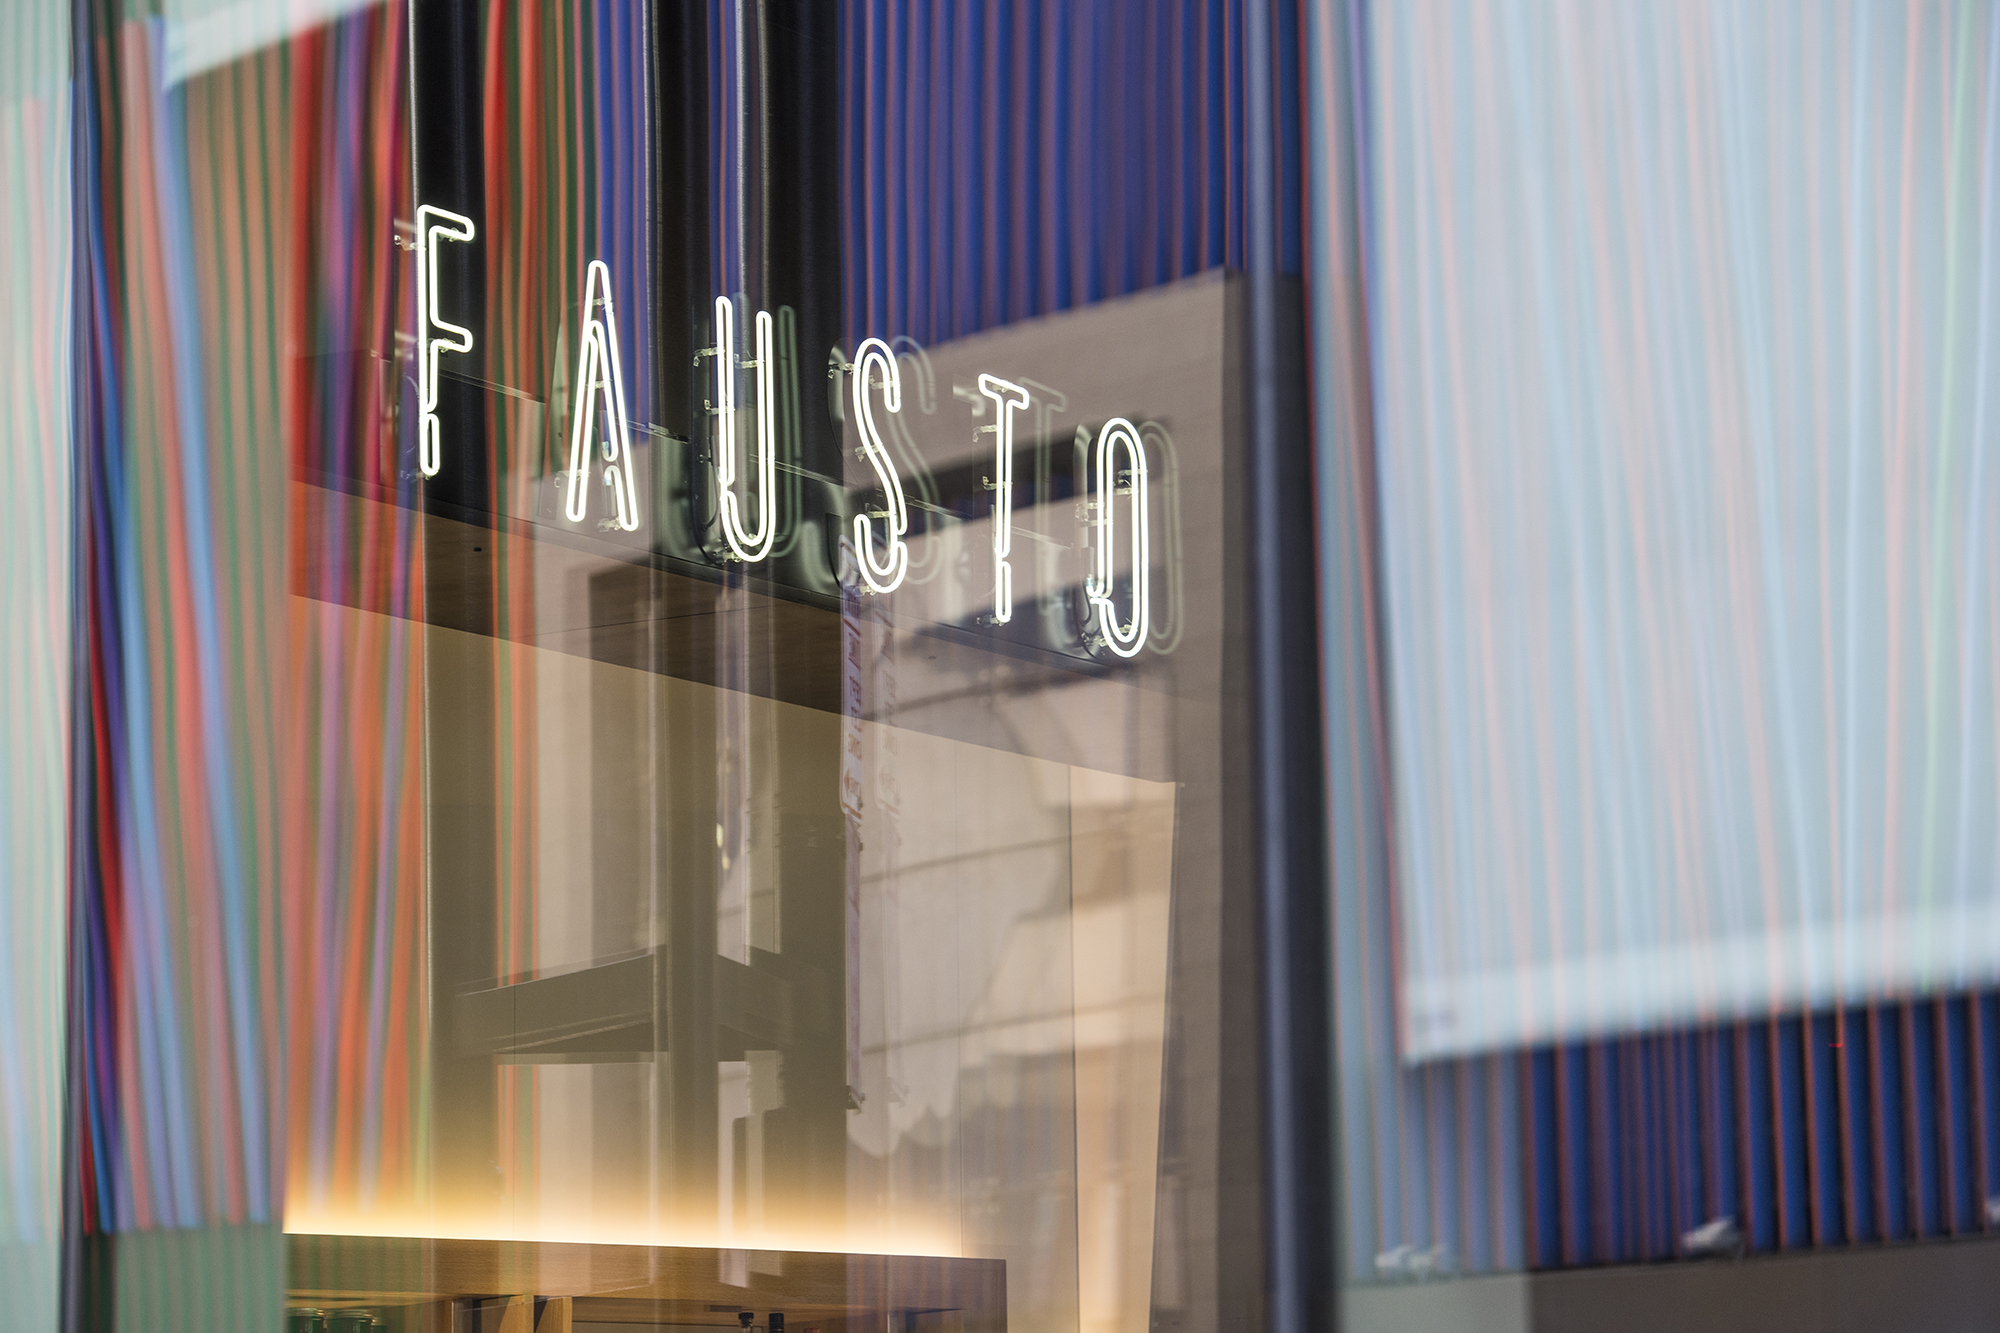  Through the window of  Fausto  at the Contemporary Arts Center at 44 E 6th Street in downtown Cincinnati. || Image:  Twin Spire Photography  - Published: 10.2.2019 